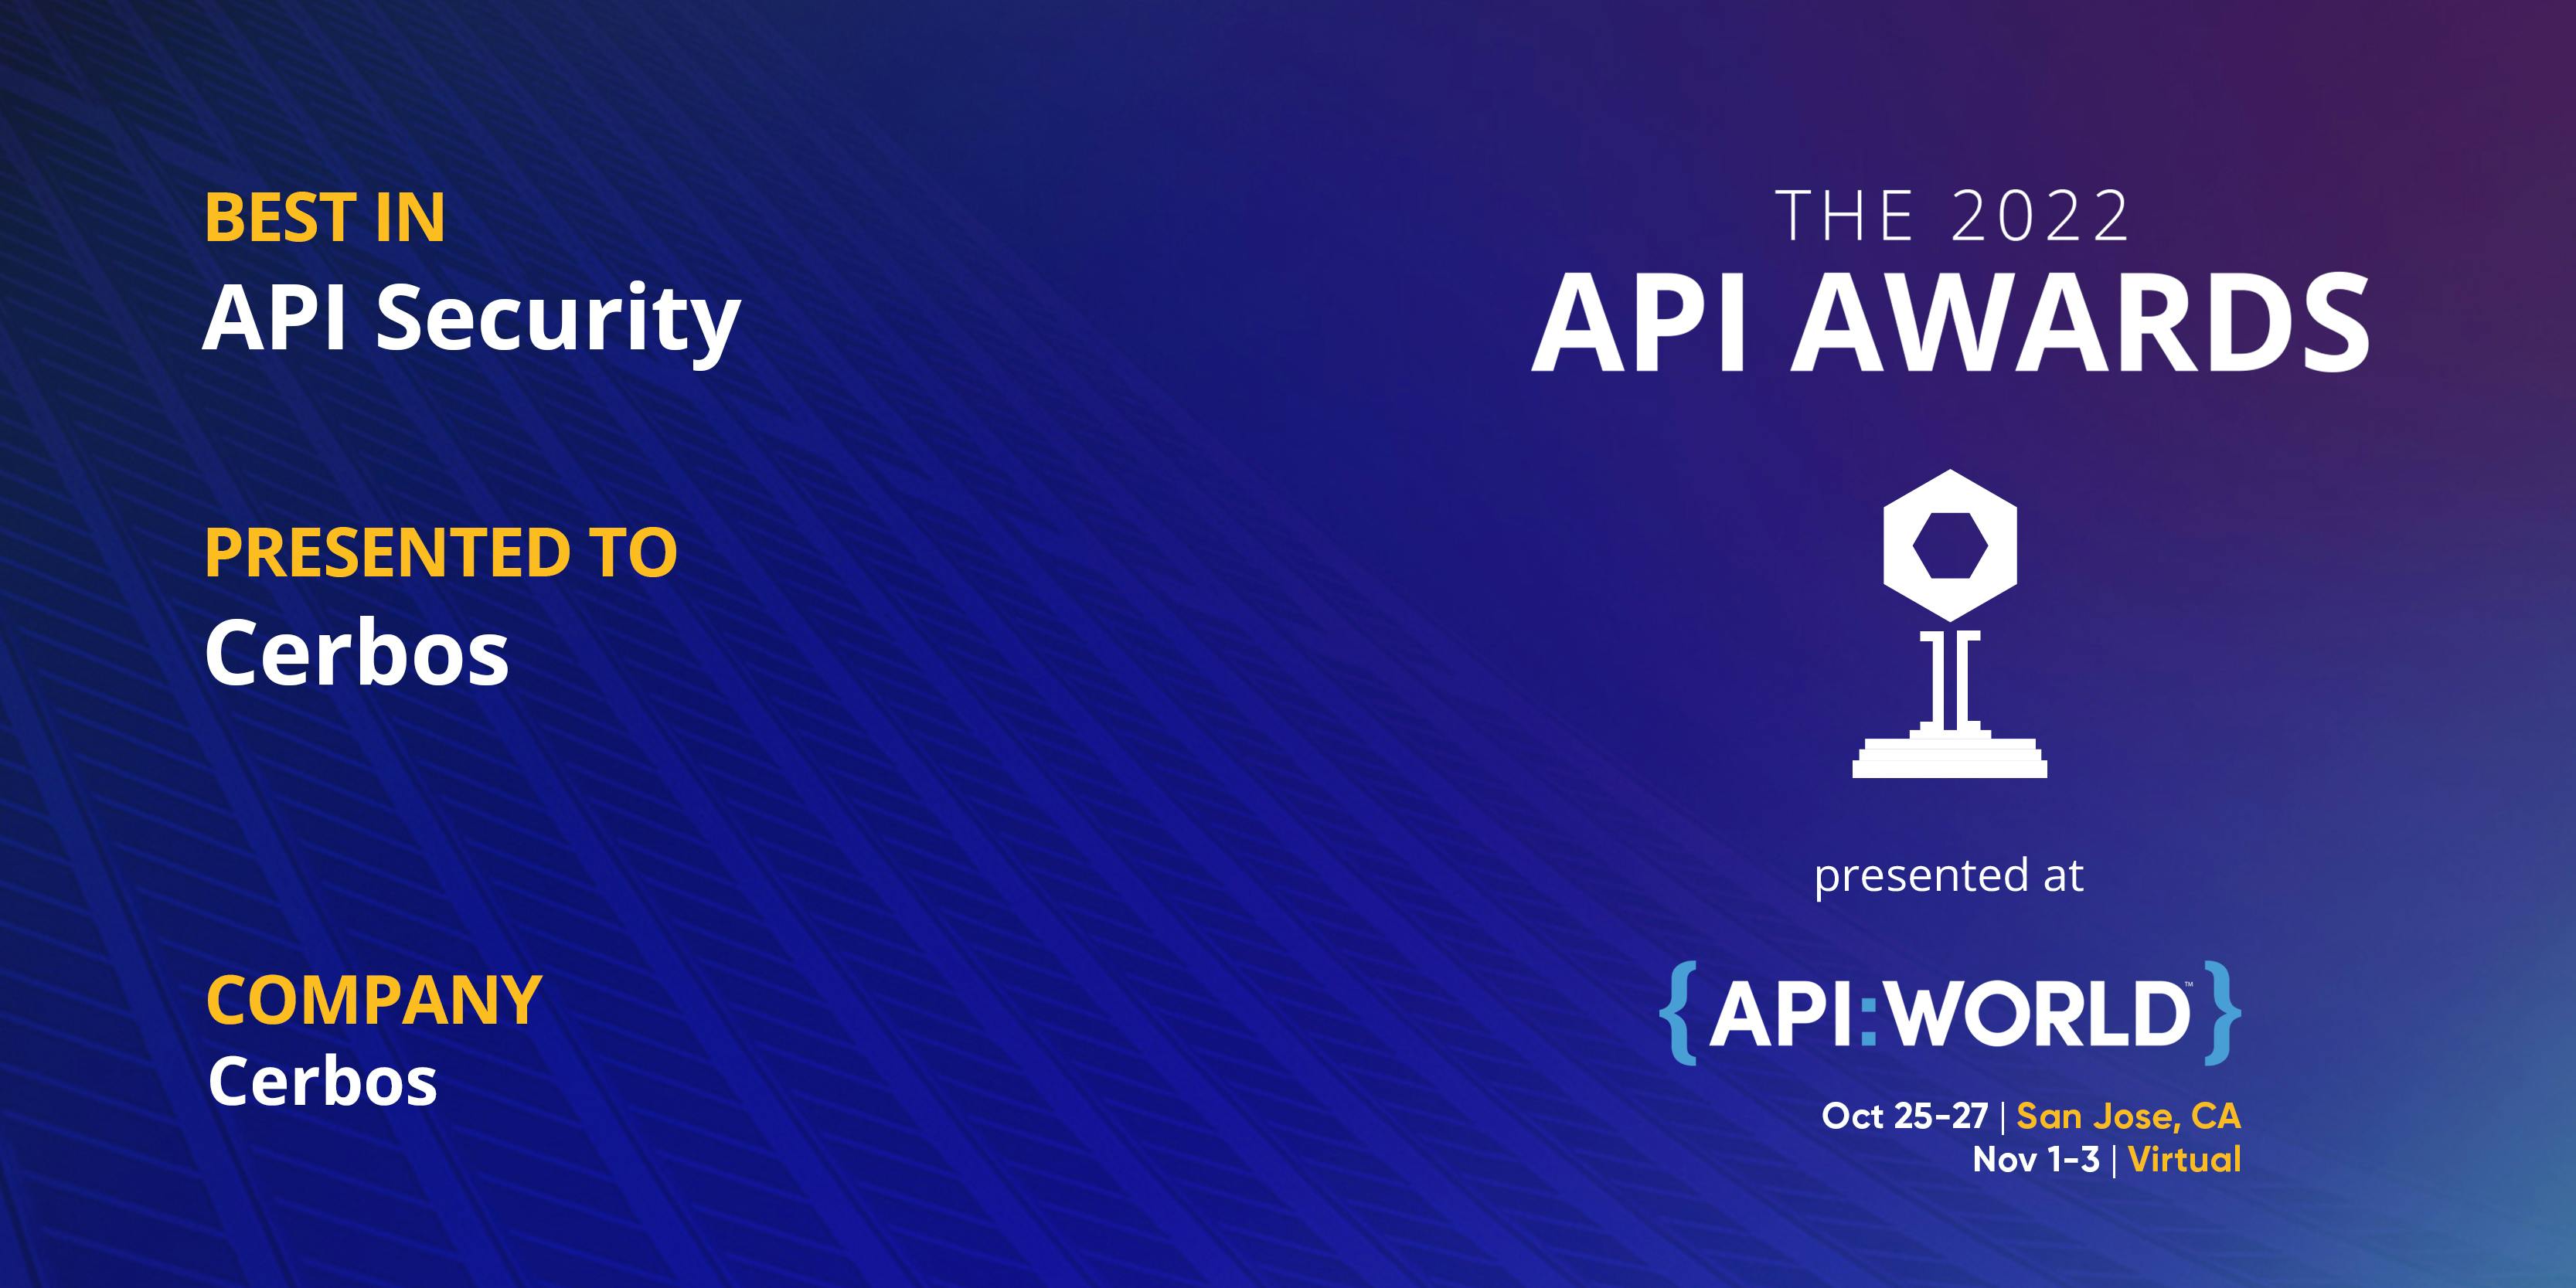 Cerbos recognised as Best in API Security at API World Awards 2022